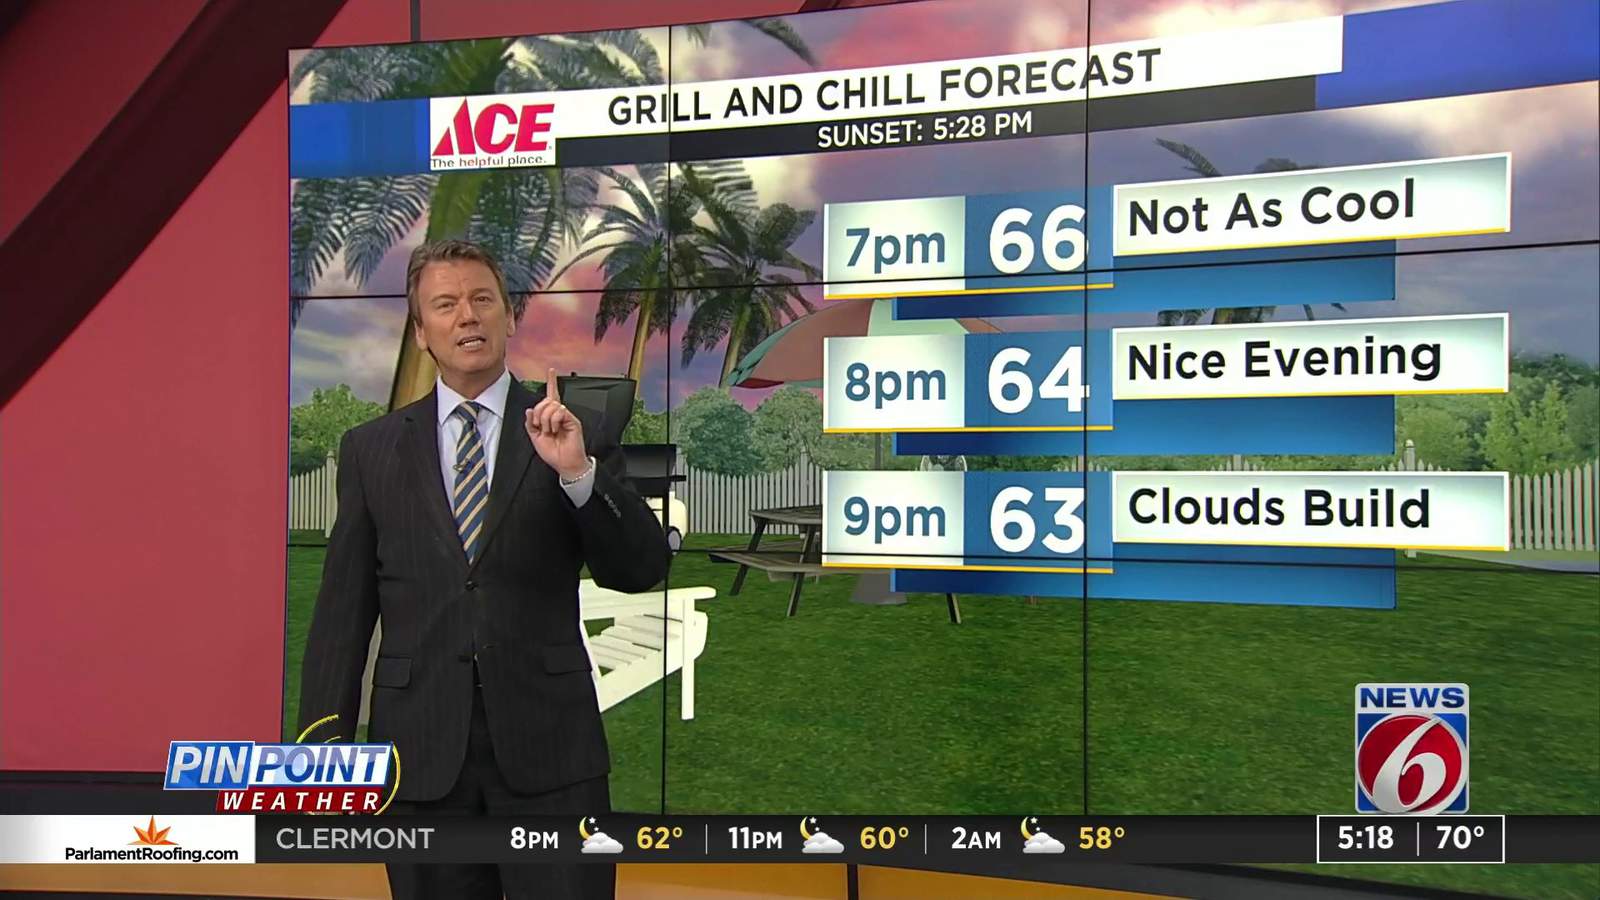 Cold start gives way to nice day in Central Florida